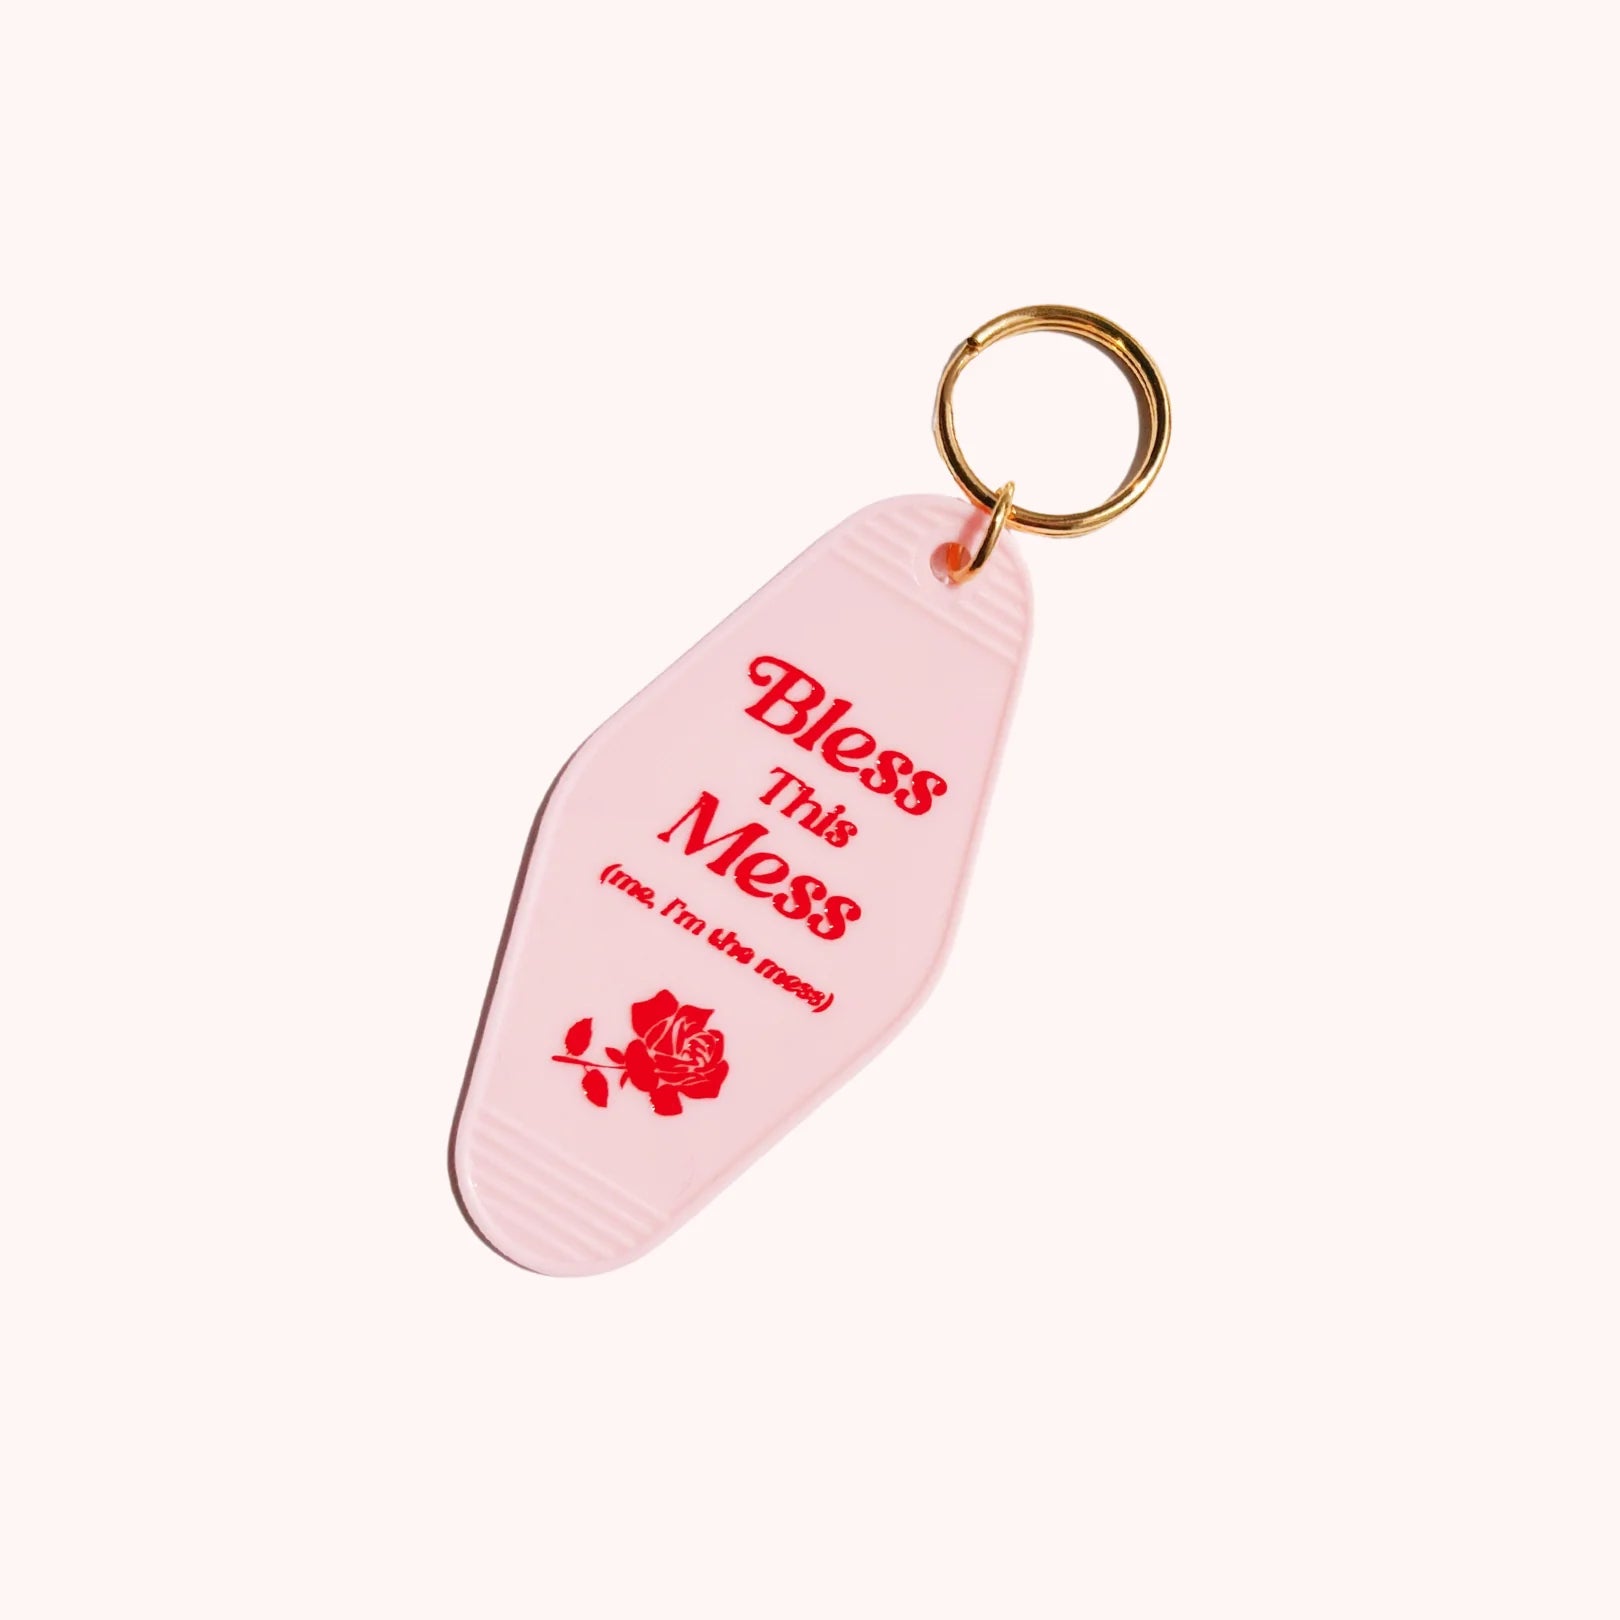 Bless This Mess Keychain